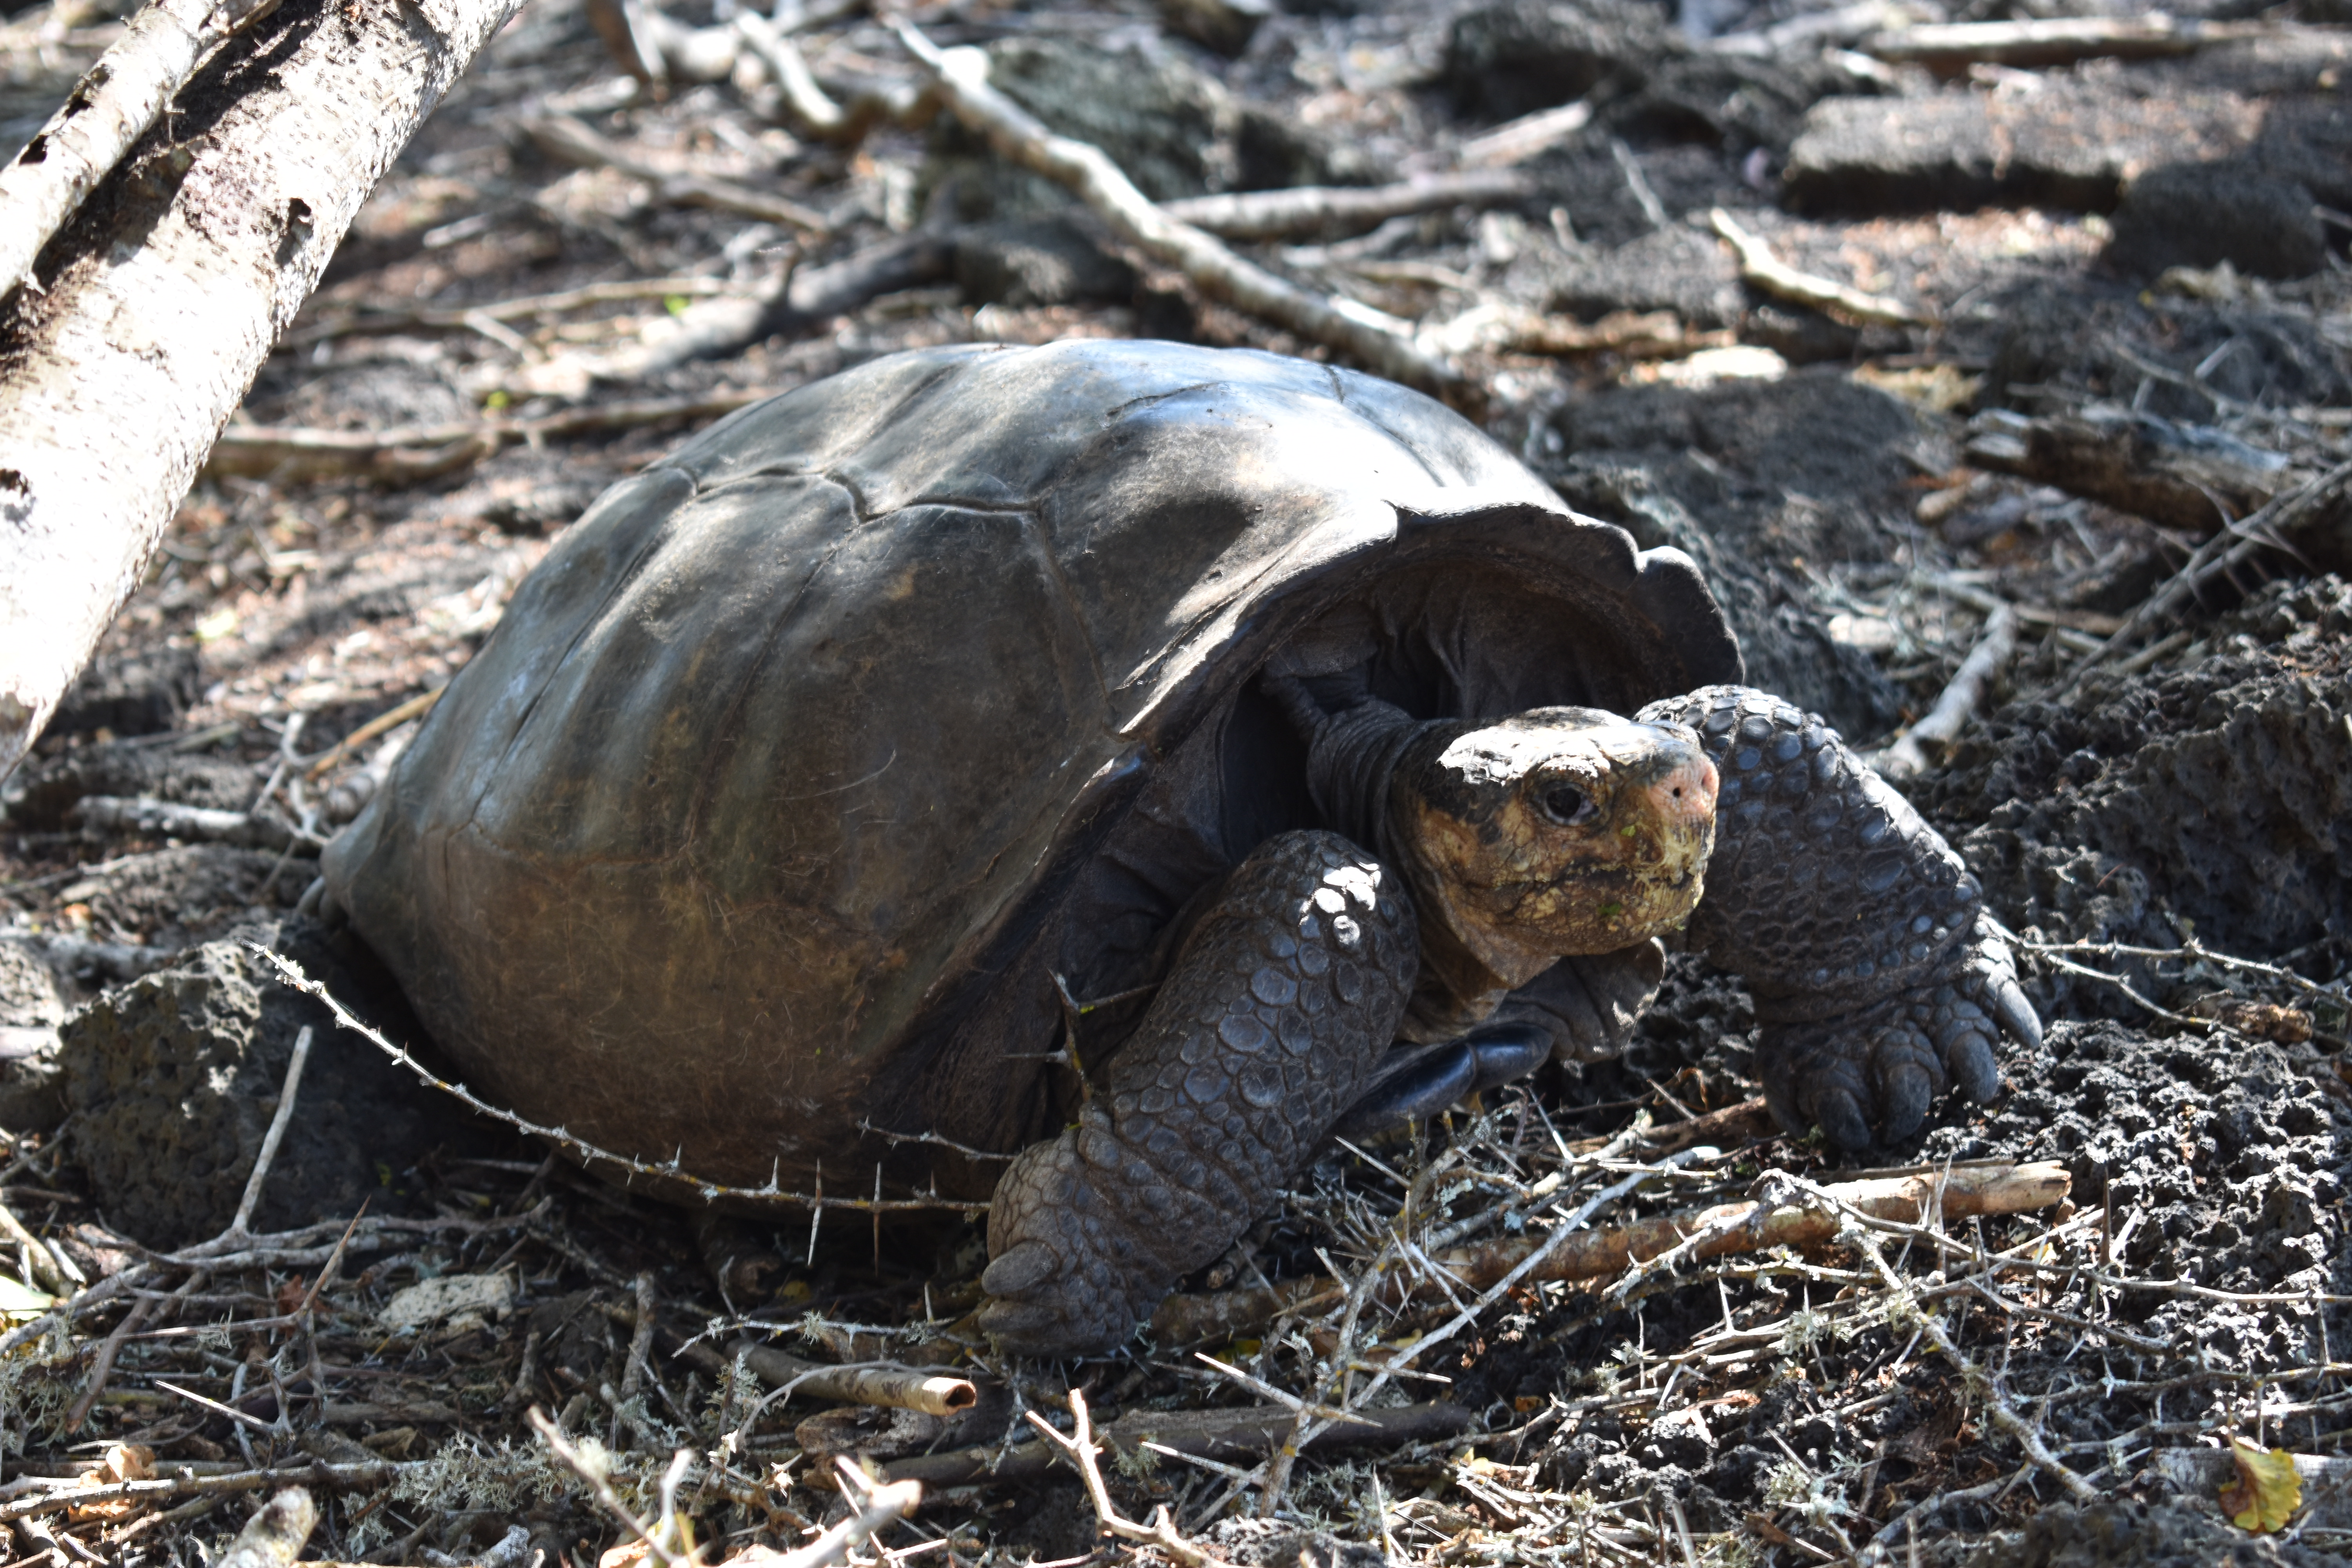 The Galapagos ‘Fantastic Giant Tortoise’ crawls across the forest floor